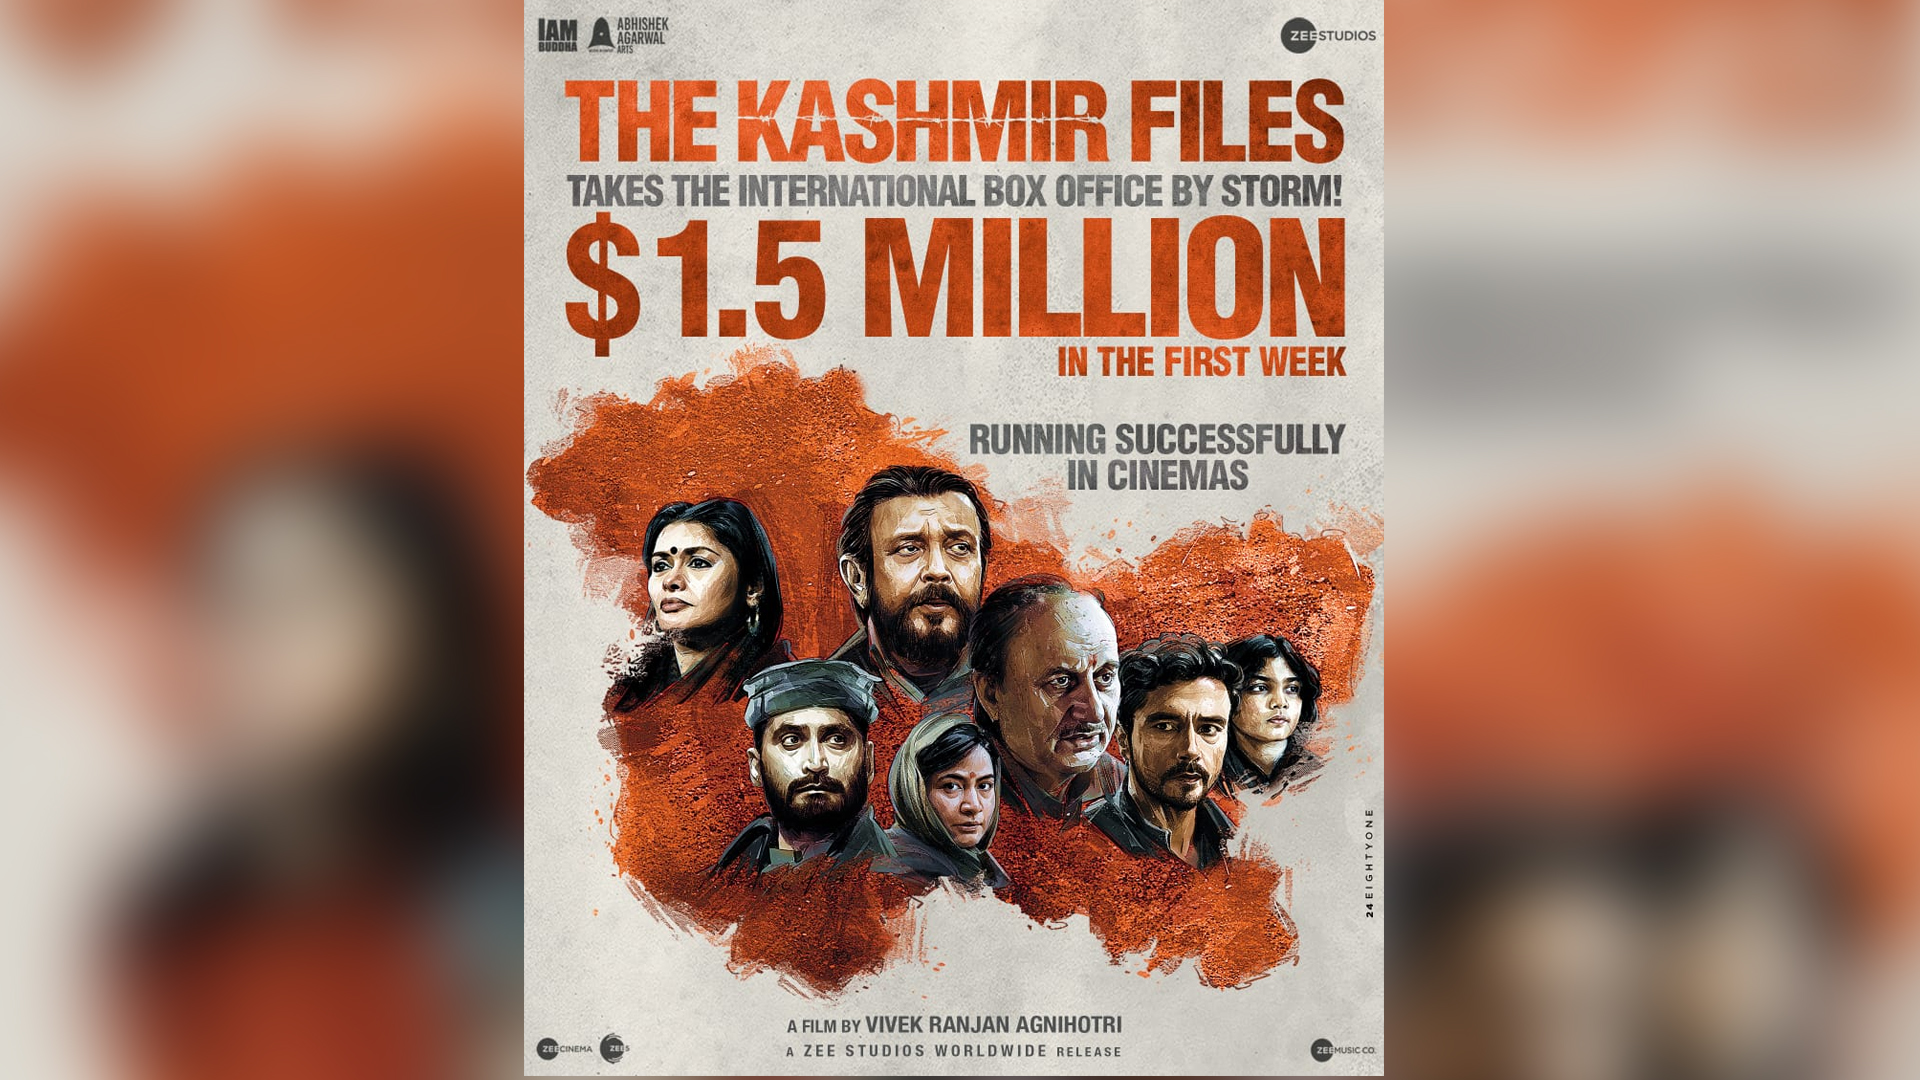 ‘The Kashmir Files’ takes the International Box-Office by storm, grosses USD 1.5 Million in its First Week, aiming at a total of USD 3 Million by the end of the second weekend